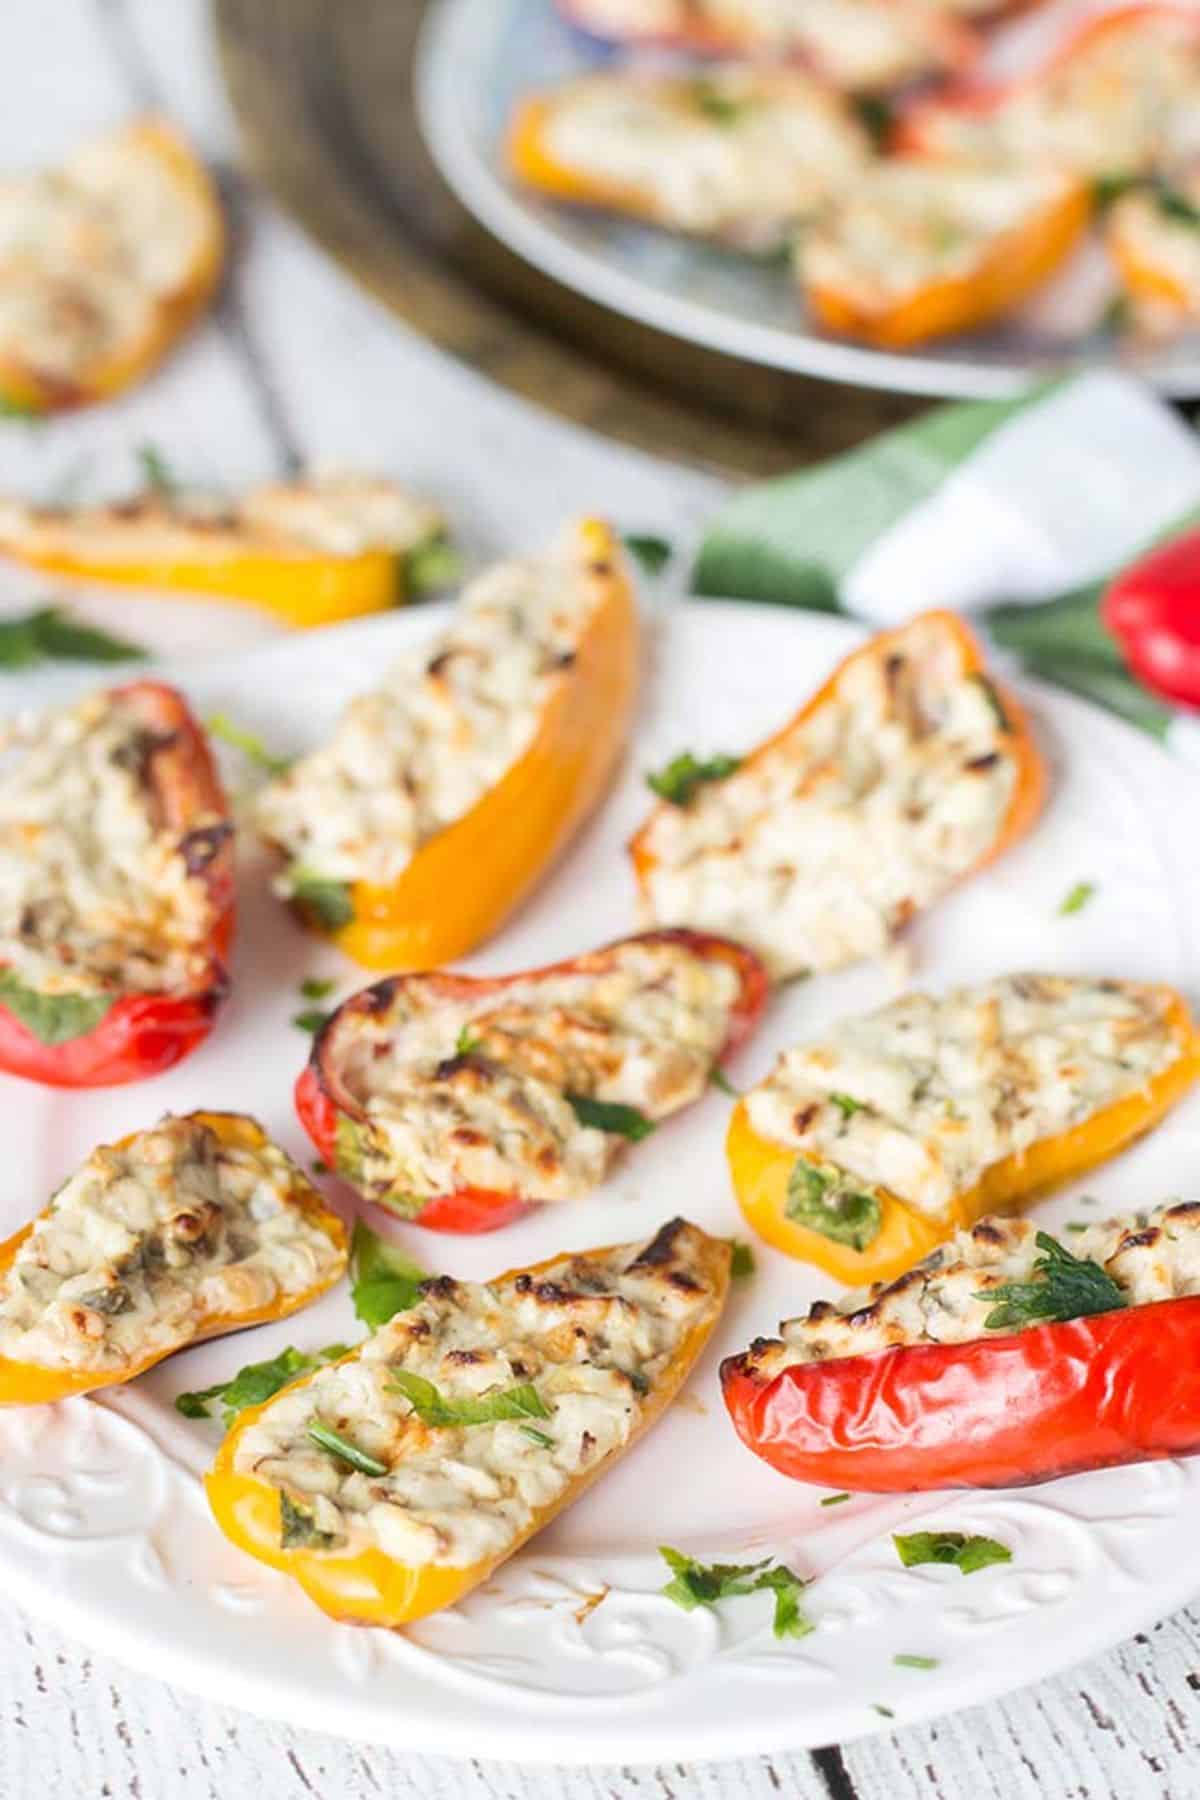 Mouth-watering Cream Cheese and Mushroom Stuffed Mini Bell Peppers on a white plate.